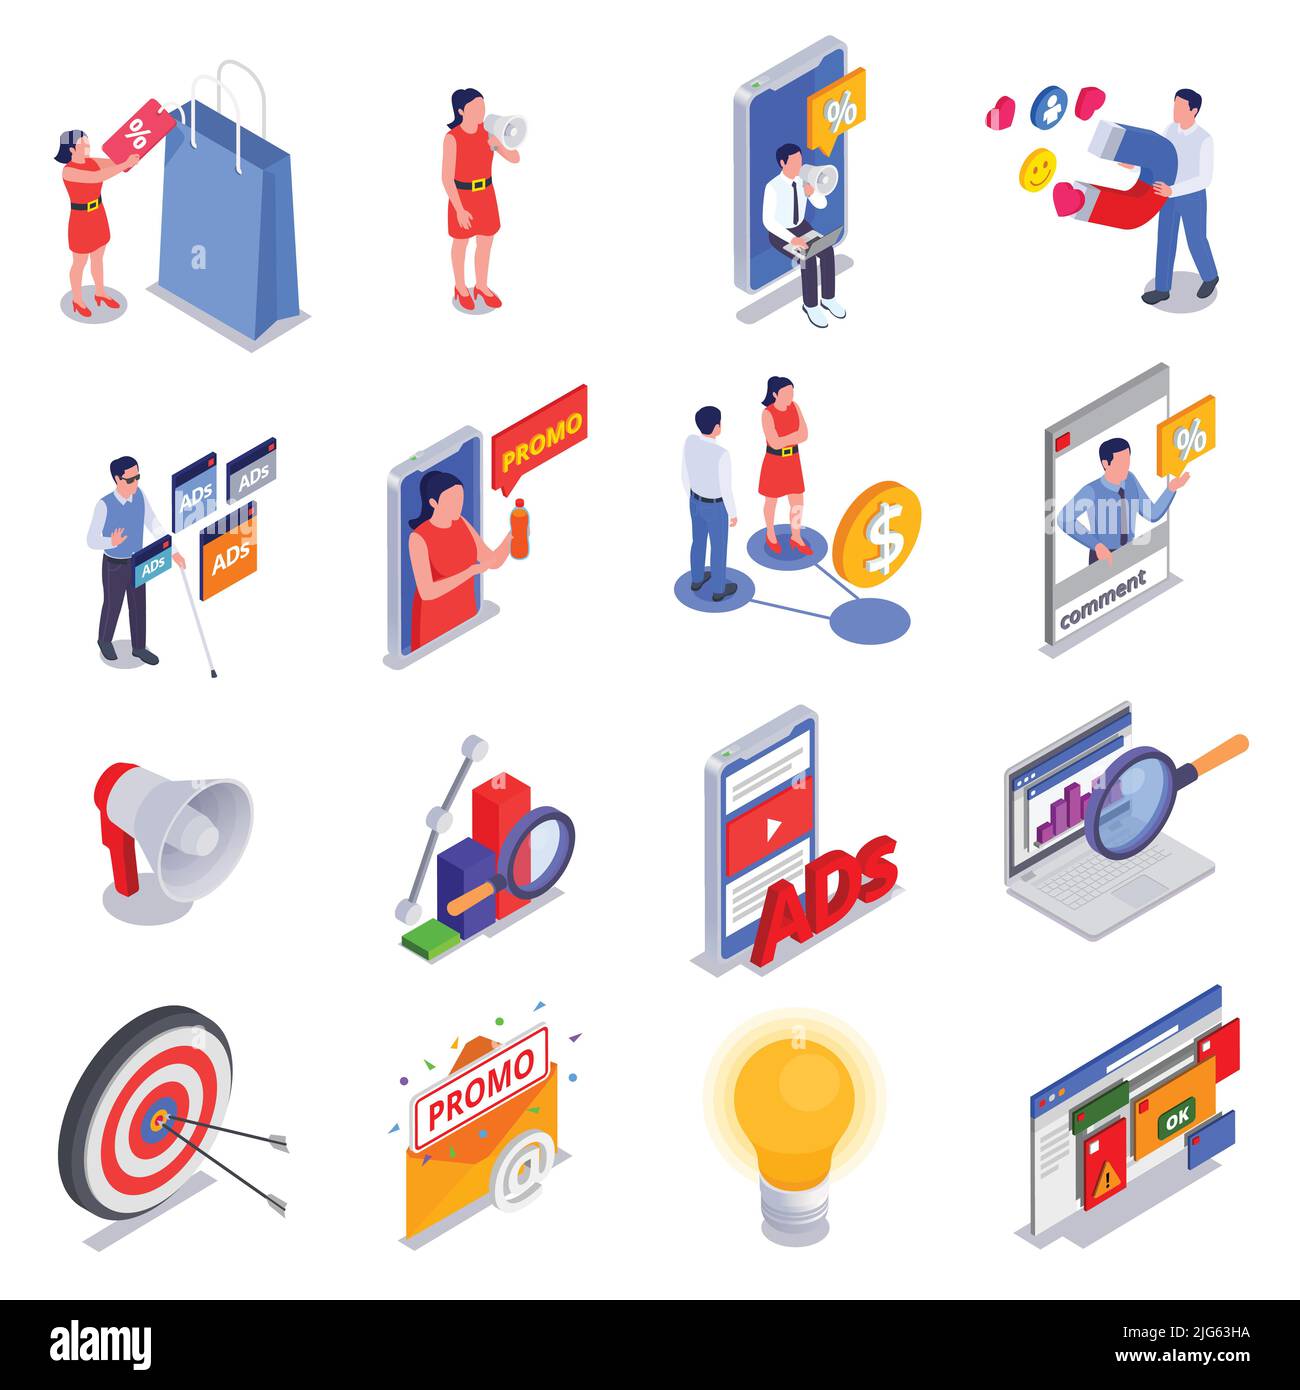 Marketing technologies isometric icon set girl in a red dress and bag from sale with loudspeaker in his hands promotional products man with magnet and Stock Vector